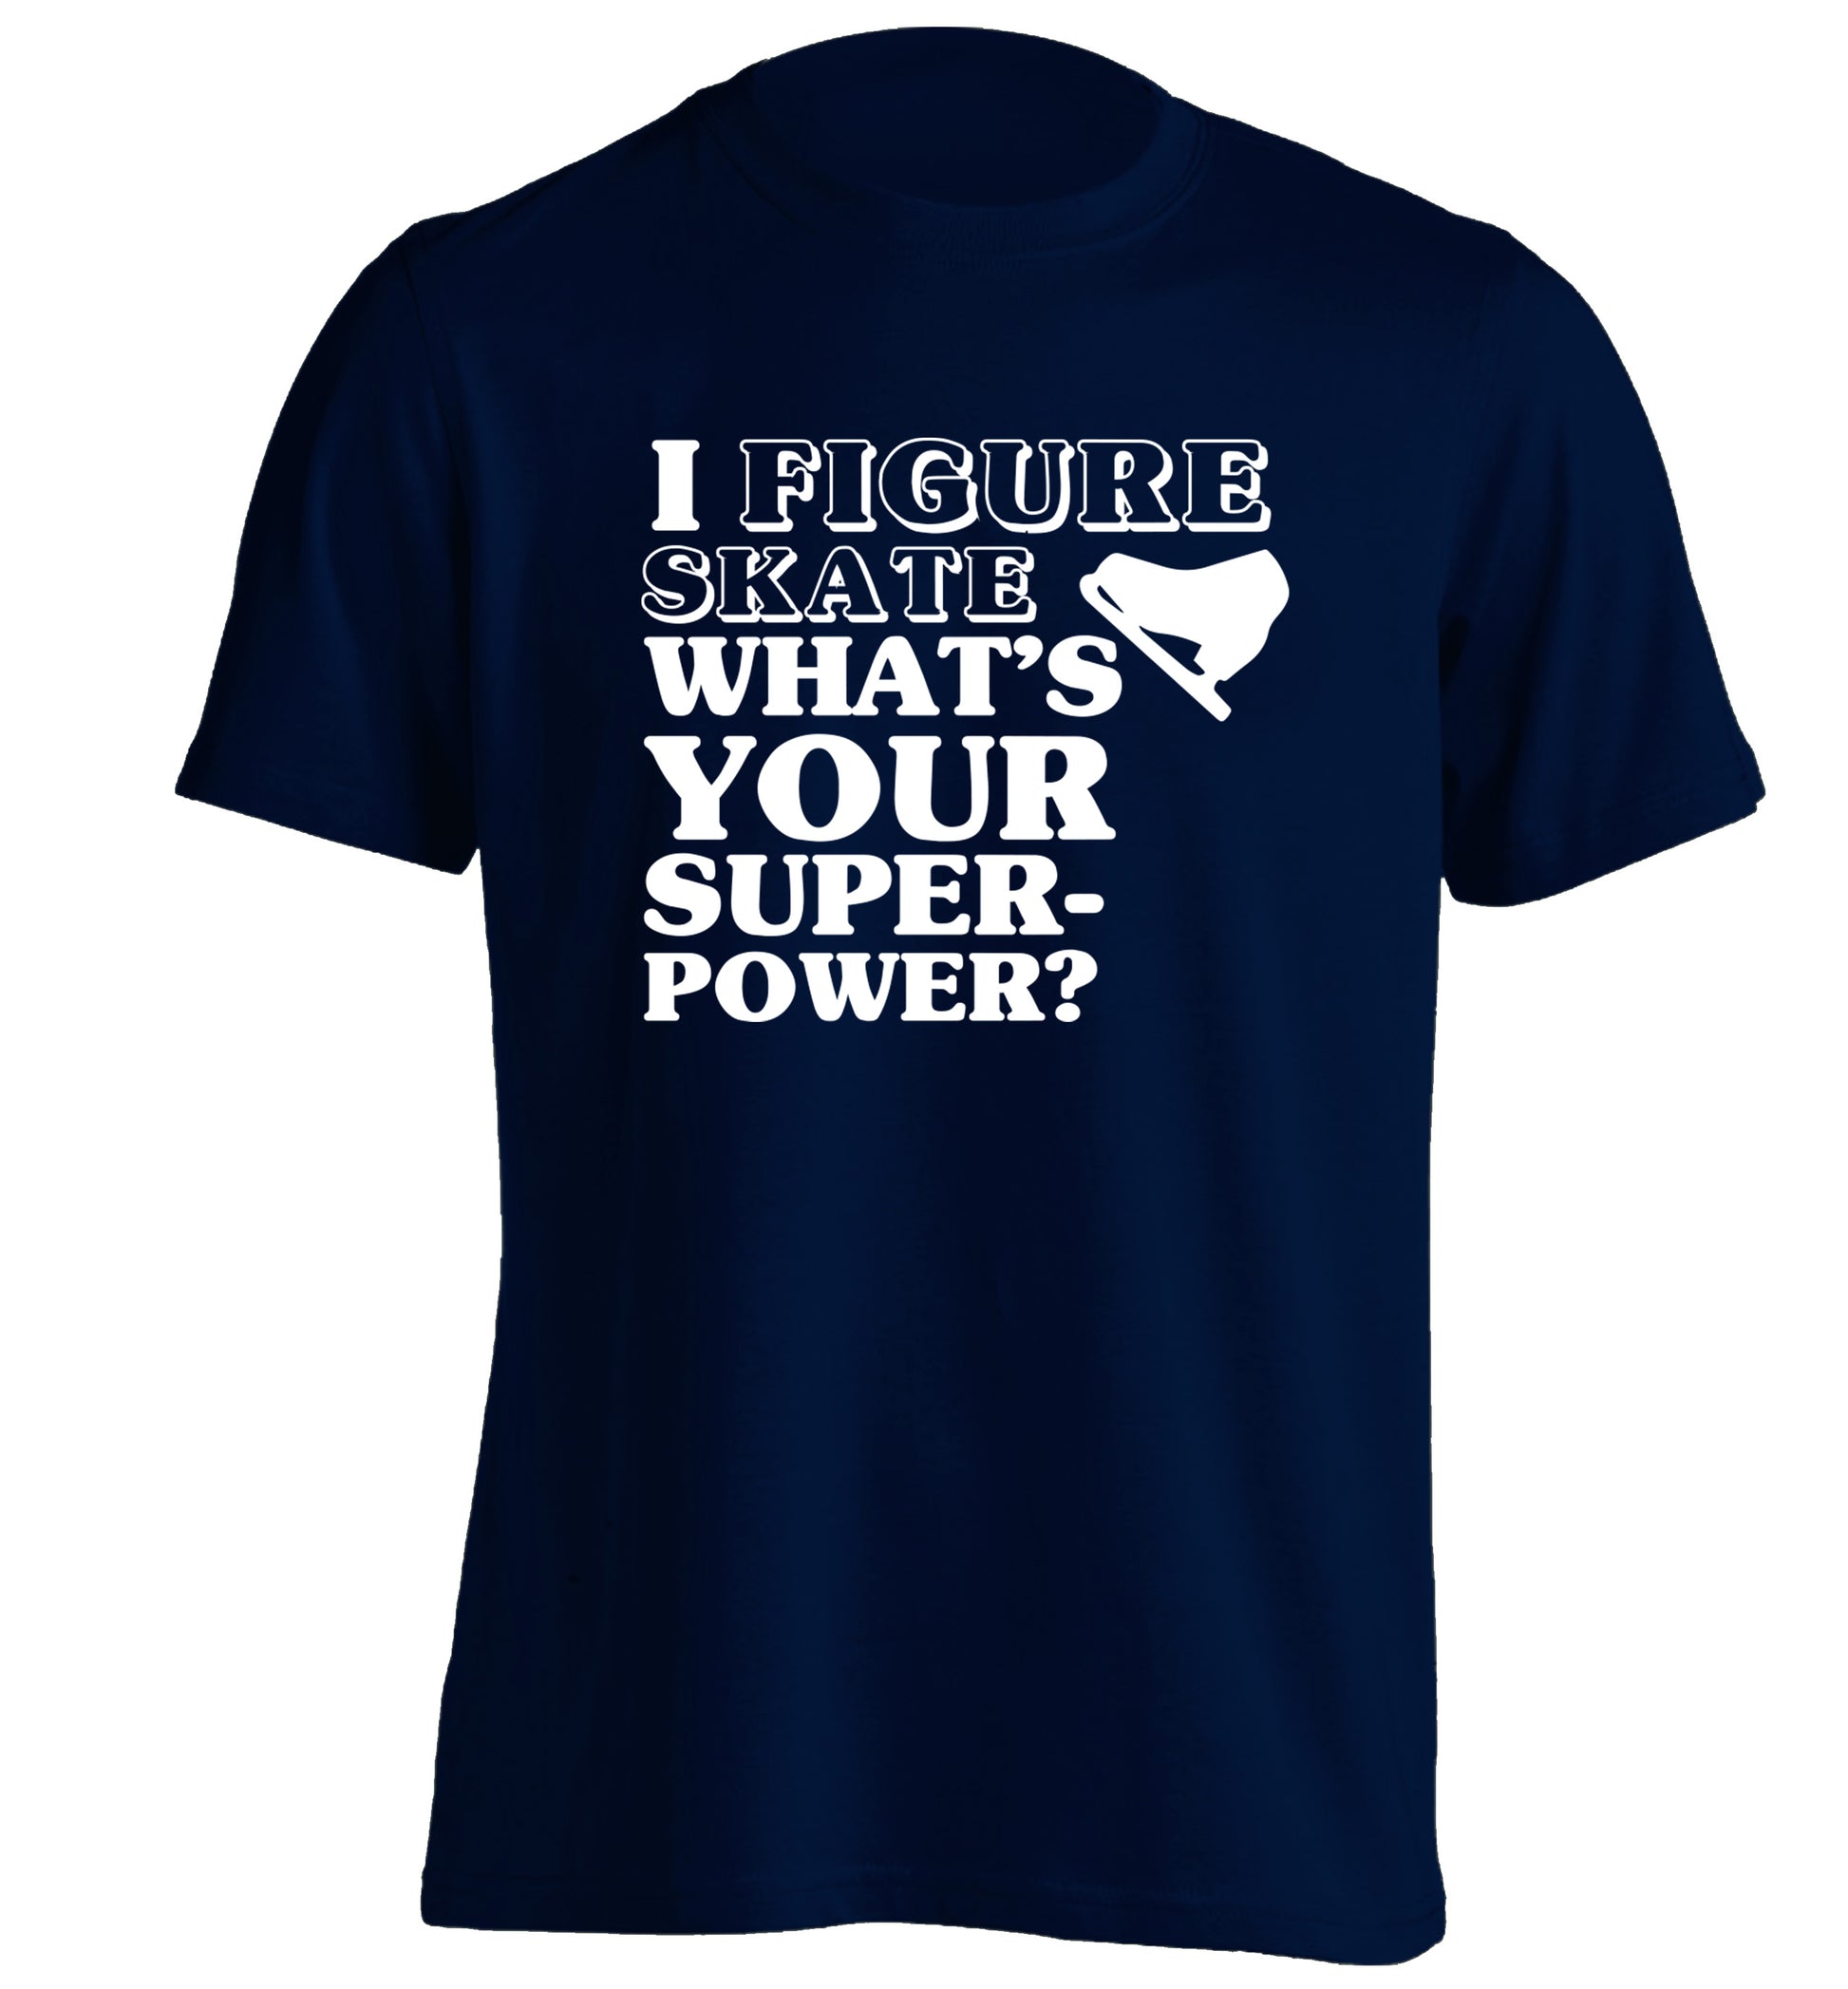 I figure skate what's your superpower? adults unisexnavy Tshirt 2XL